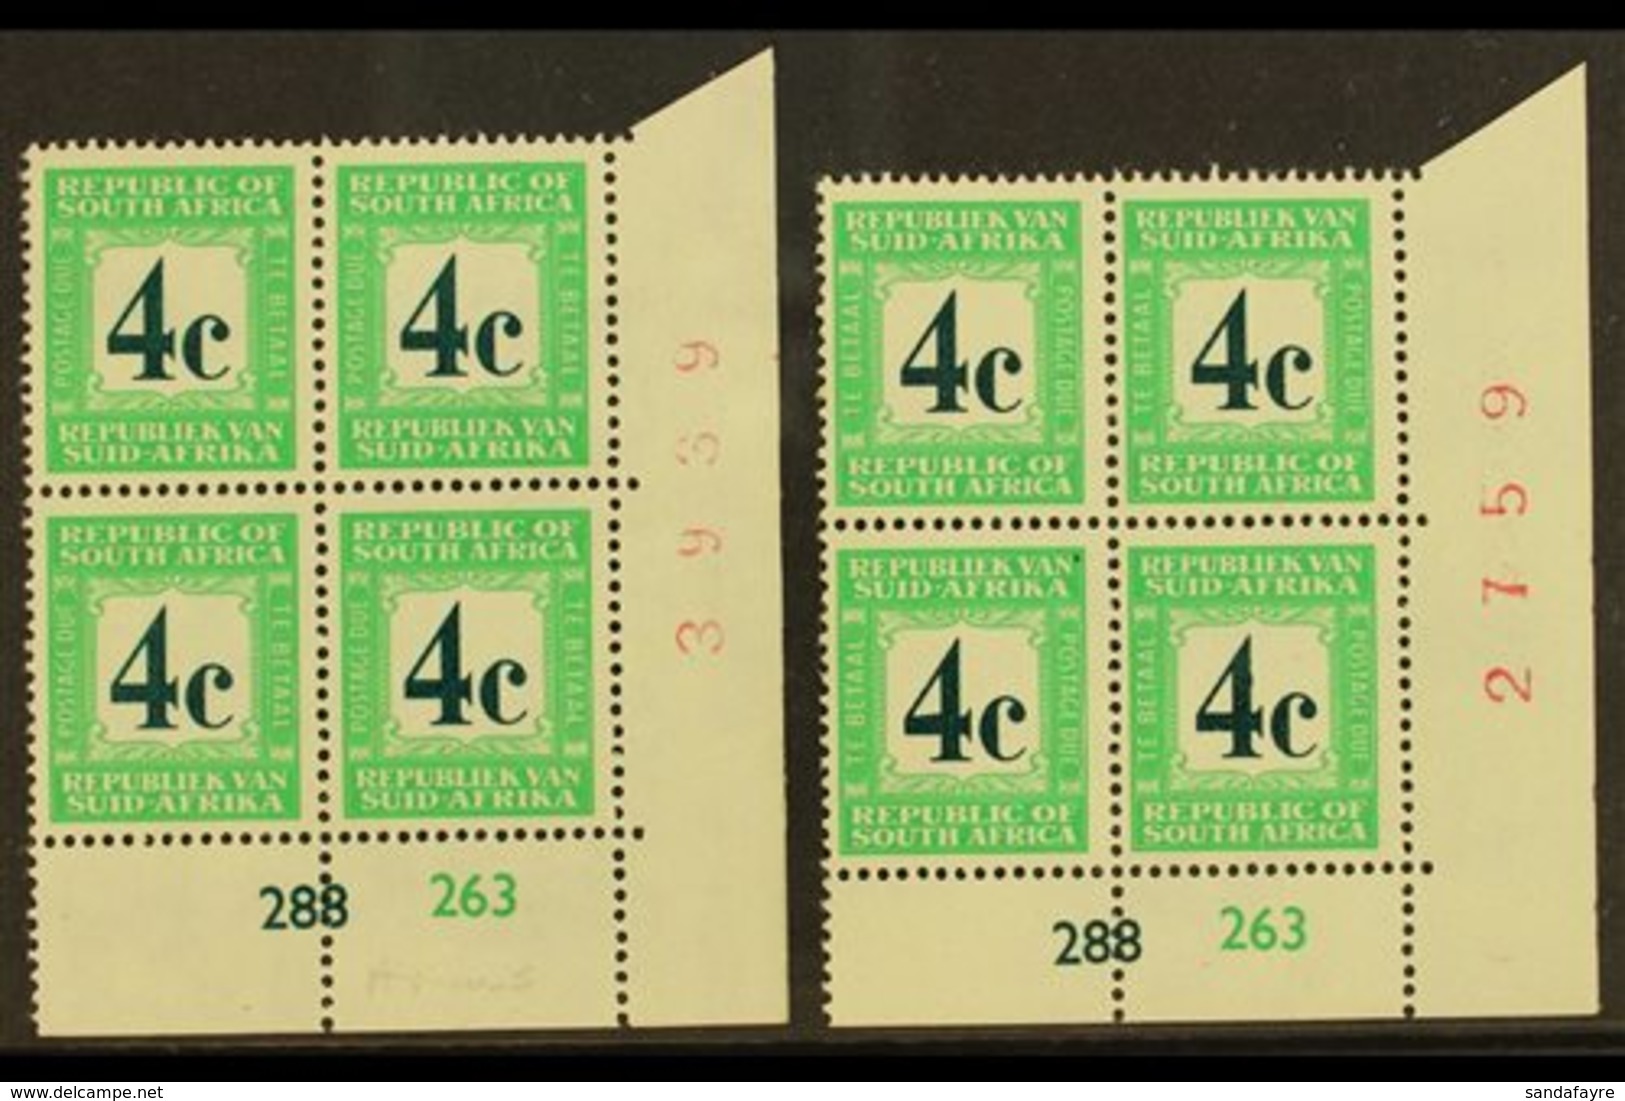 POSTAGE DUES  1961-9 4c Deep Myrtle-green & Light Emerald, Cylinder Blocks Of 4 Of Each Language Setting, SG D54, 54a, N - Unclassified